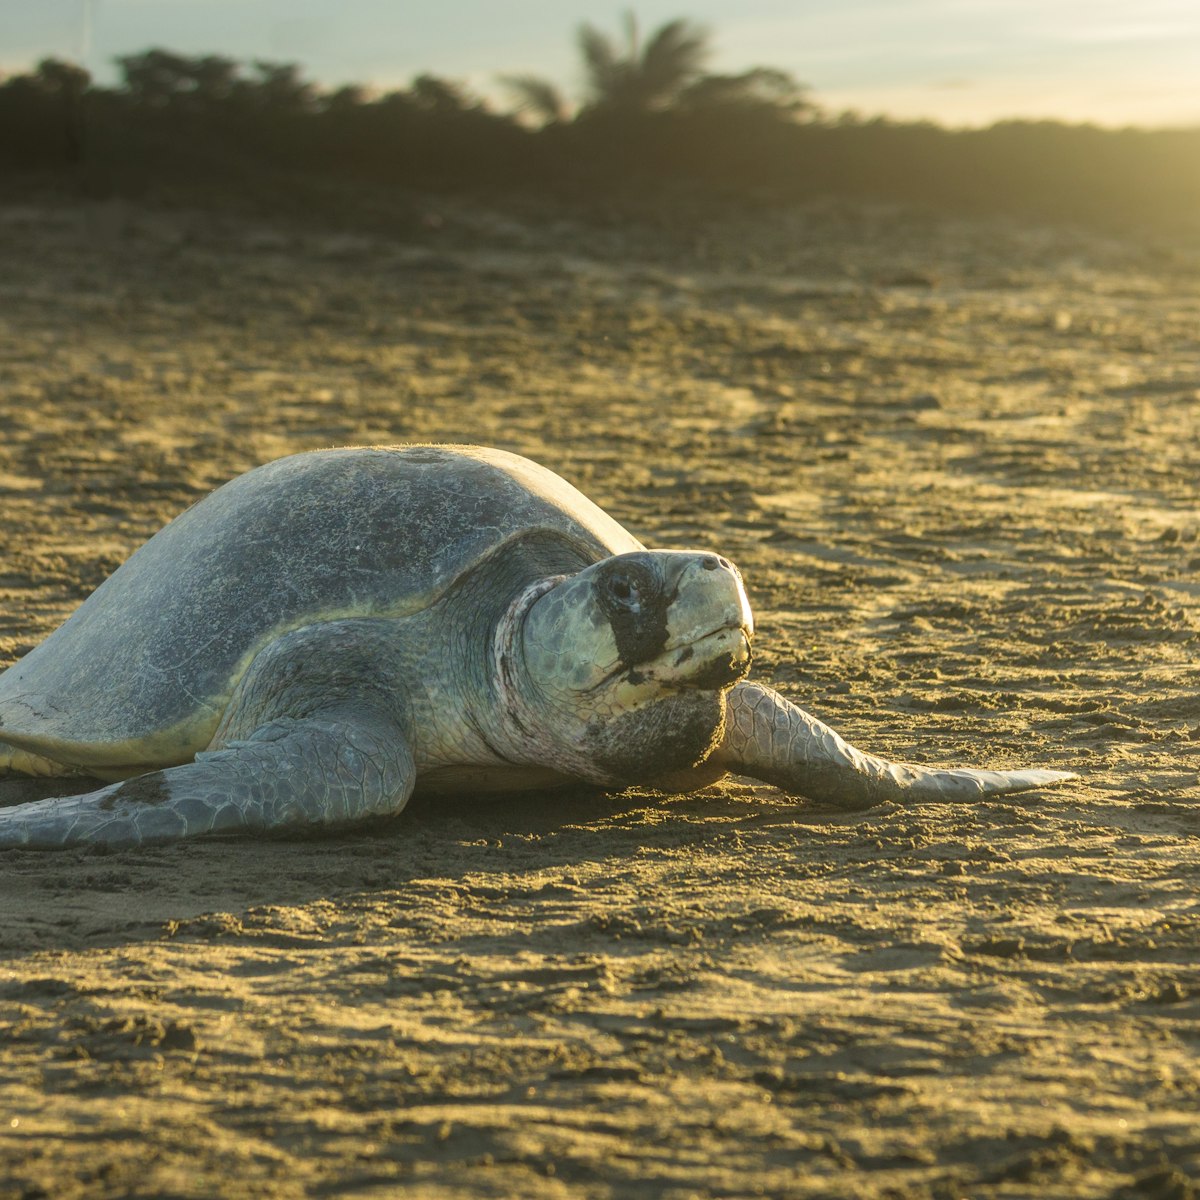 Olive ridley sea turtle on the sand in Ostional Nacional Wildlife Refuge. 